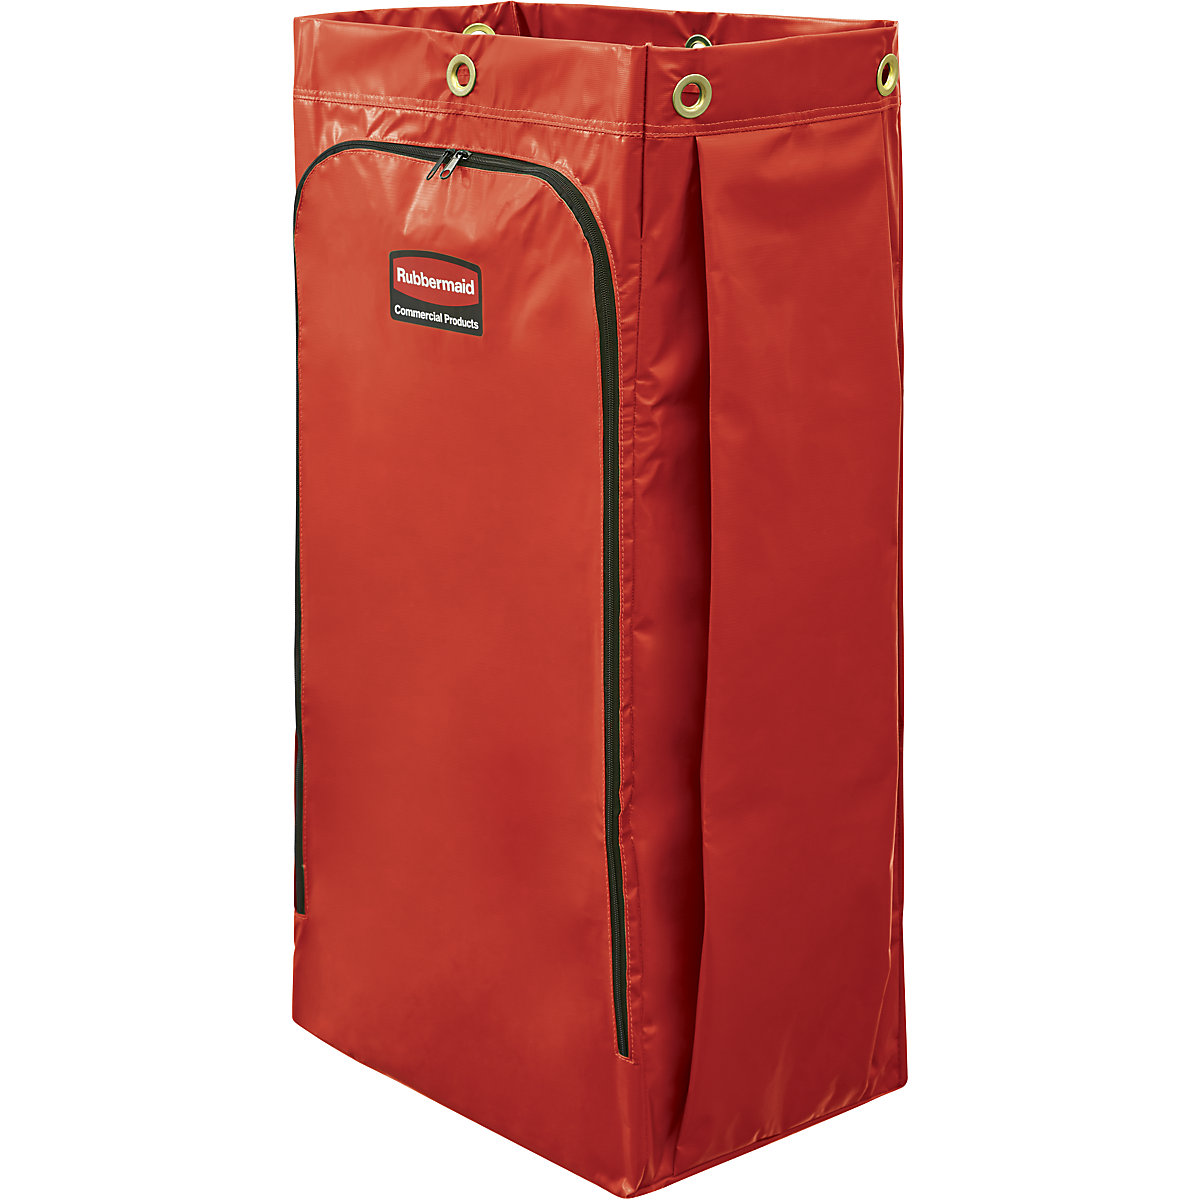 Recycling sack - Rubbermaid